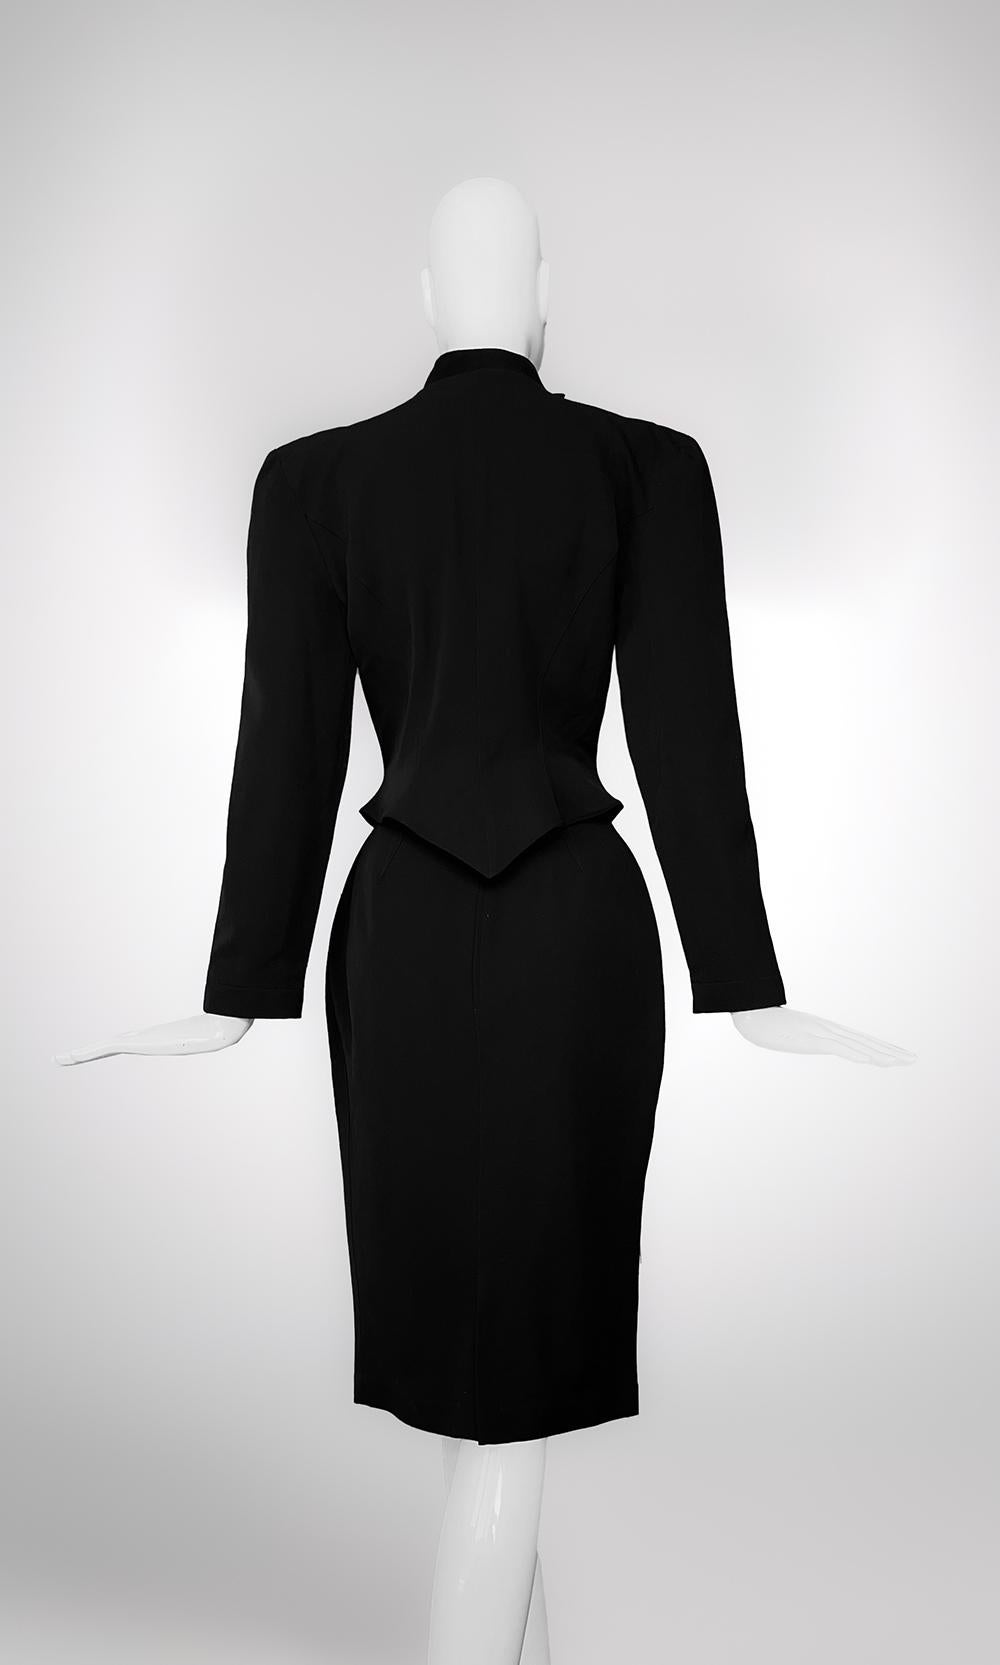 Dramatic Thierry Mugler FW1990 Archival Black Skirt Suit Sculptural For Sale 2